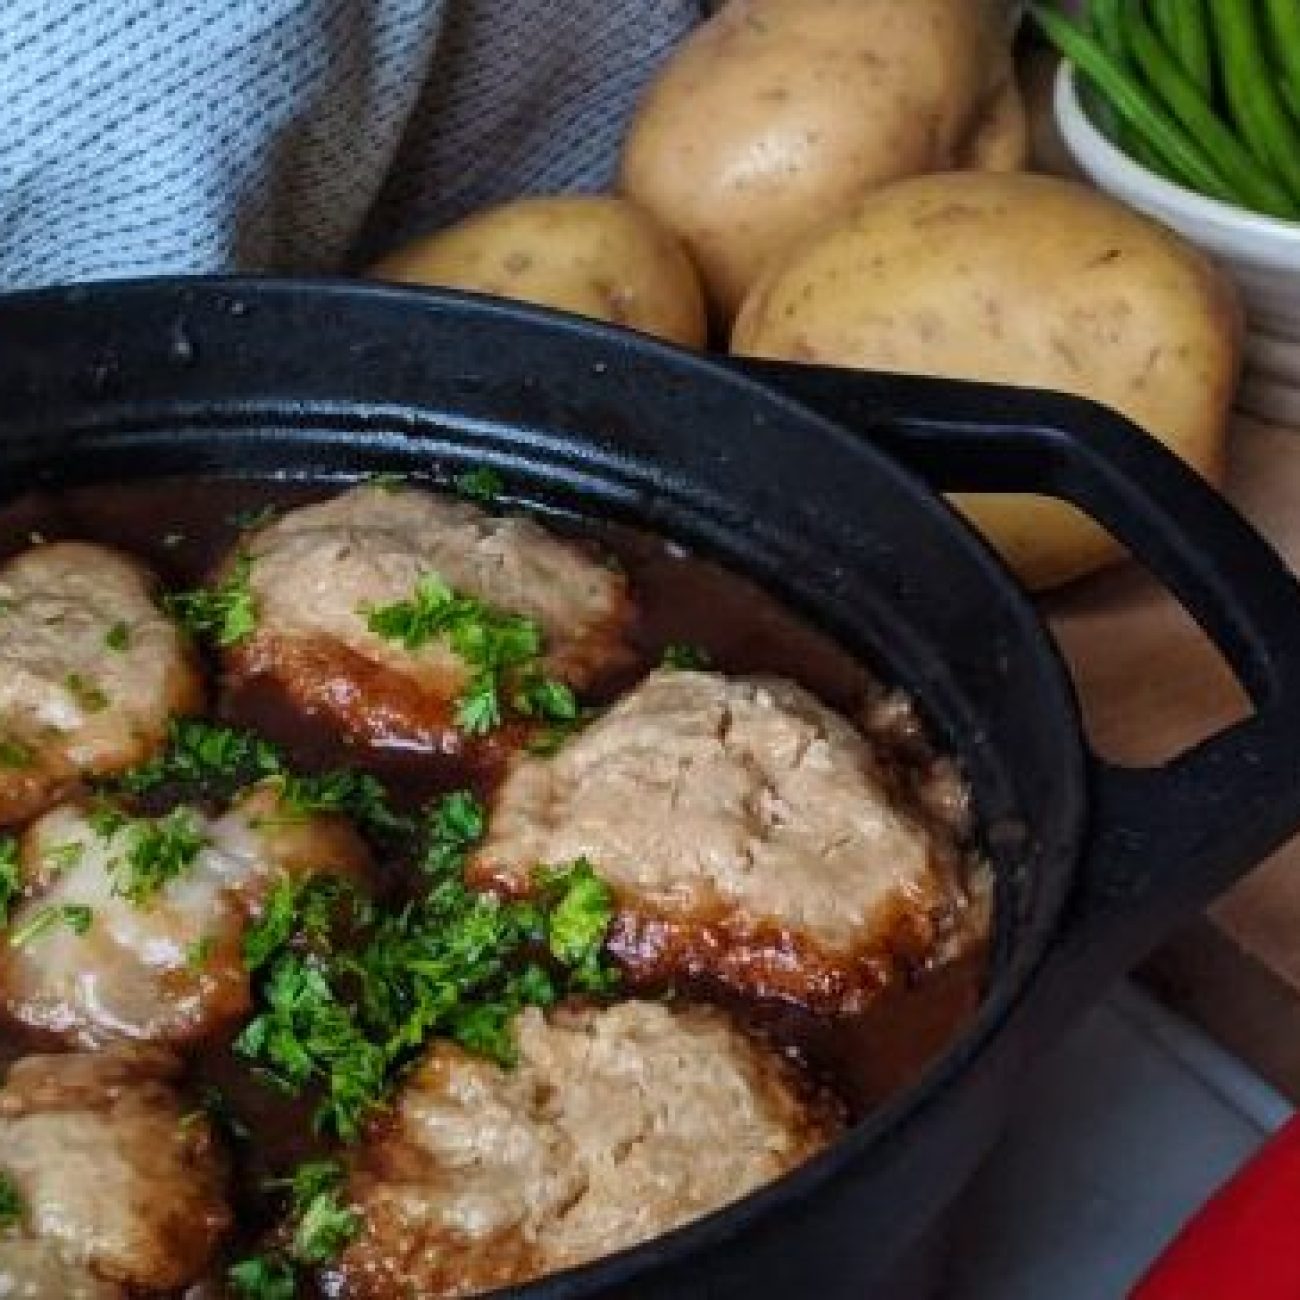 Savory Beef and Kidney Casserole with Crispy Mustard Toasts